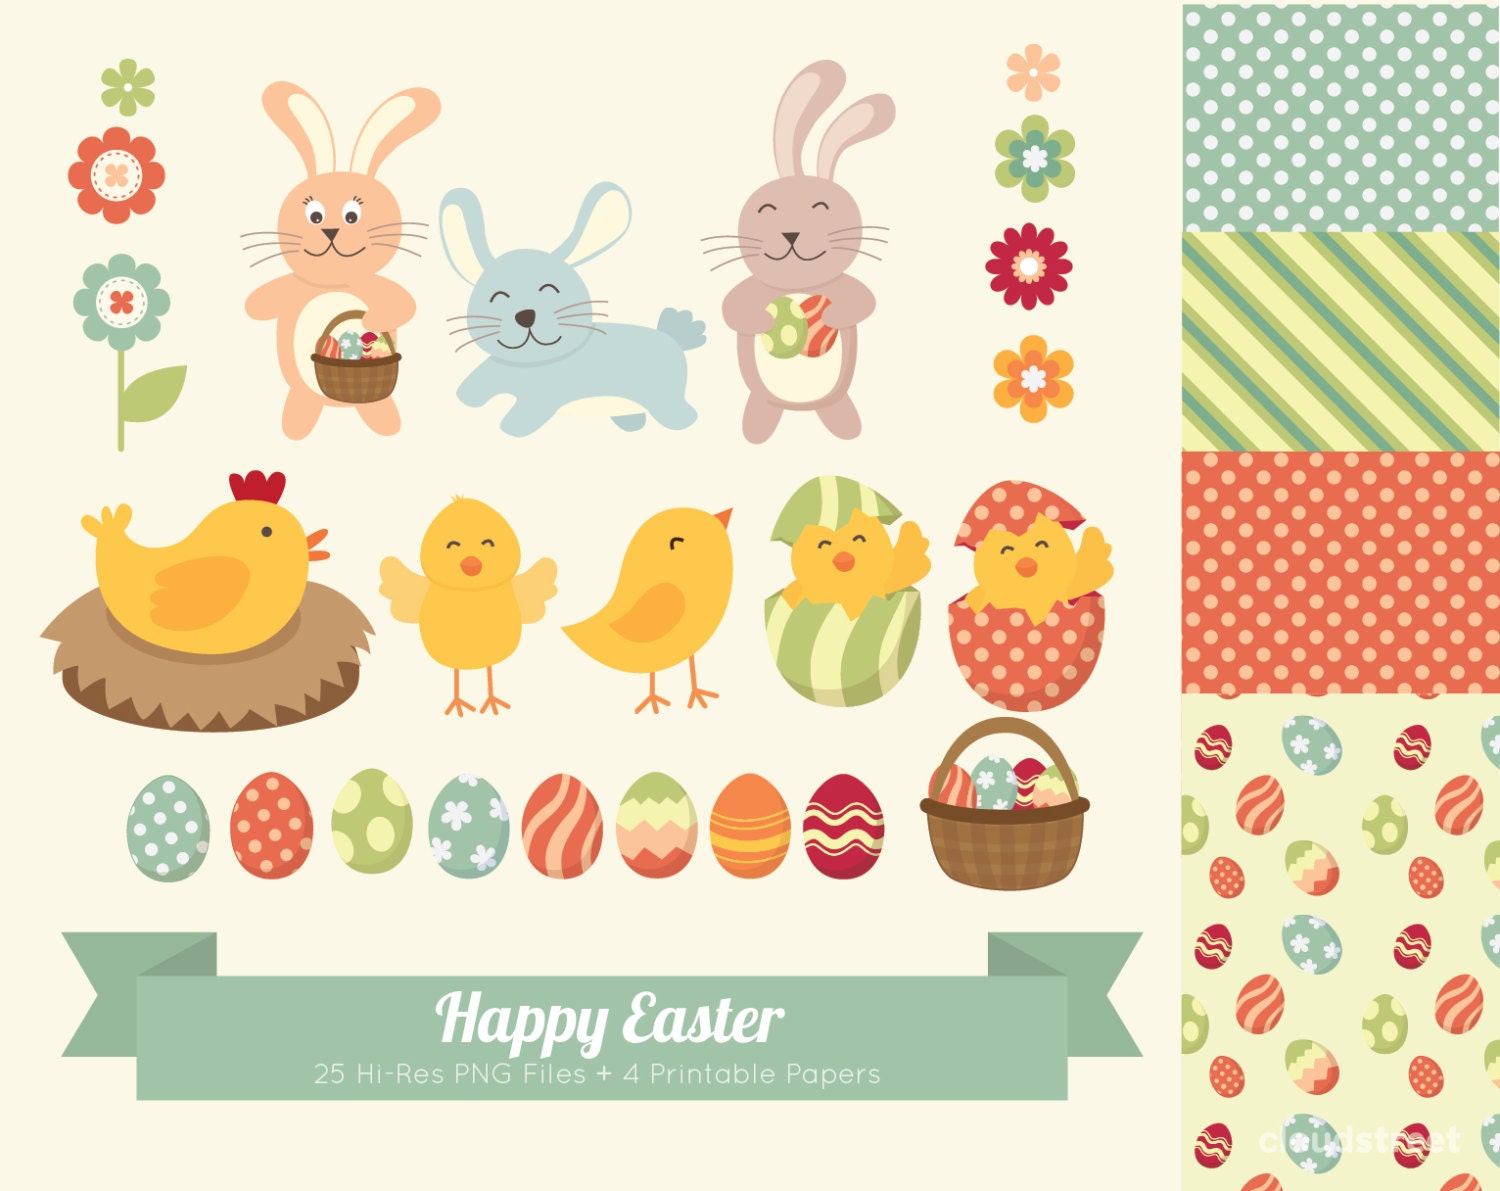 happy easter clip art download - photo #41